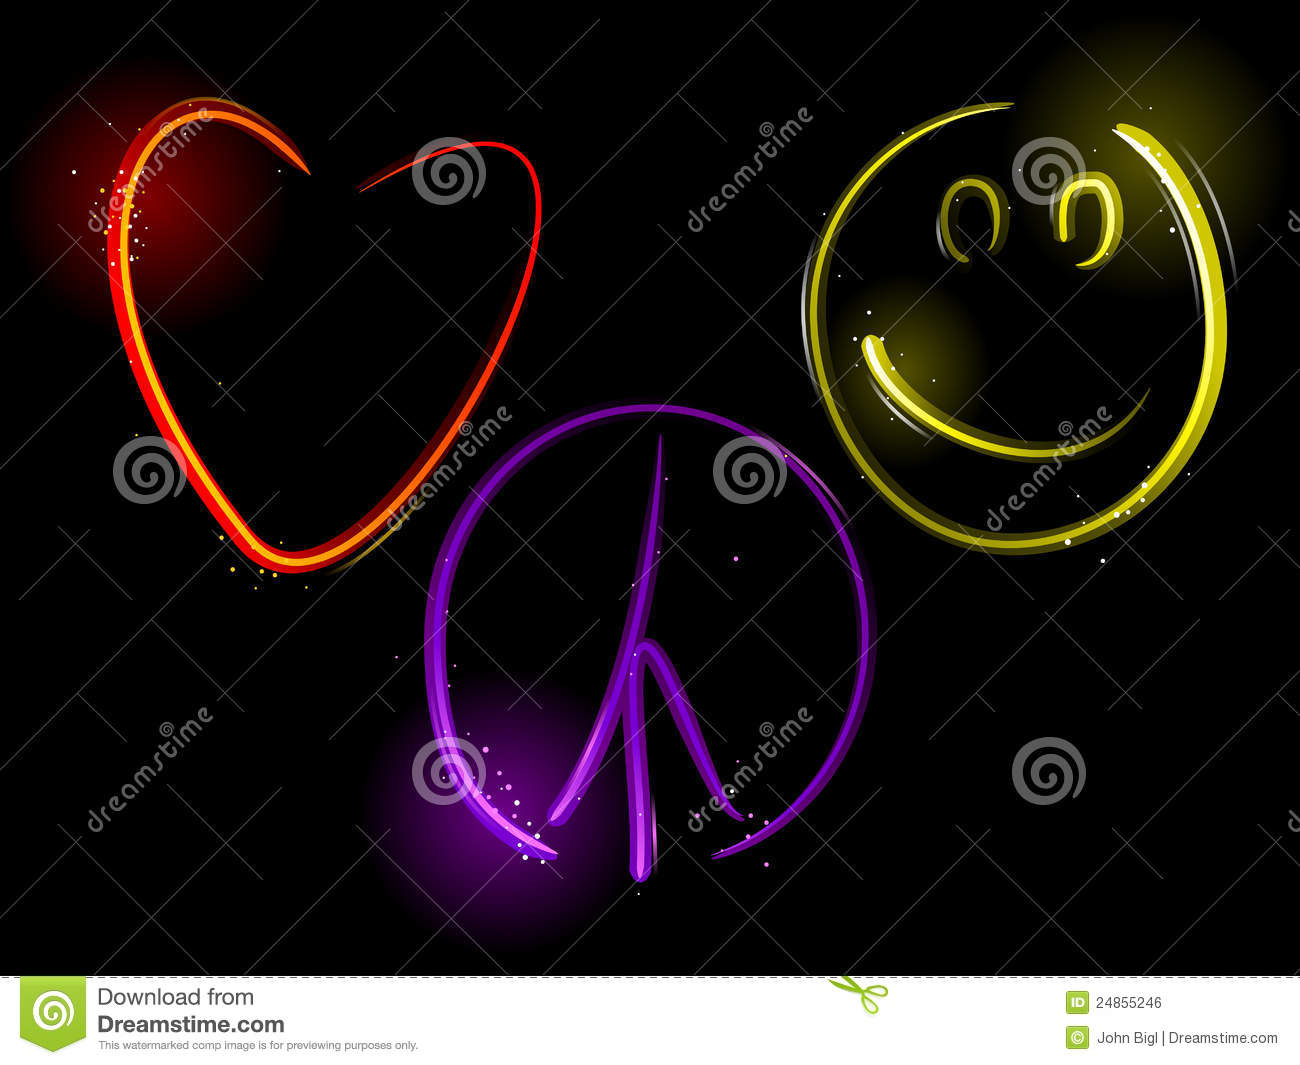 Love Peace And Happiness Royalty Free Stock Image   Image  24855246